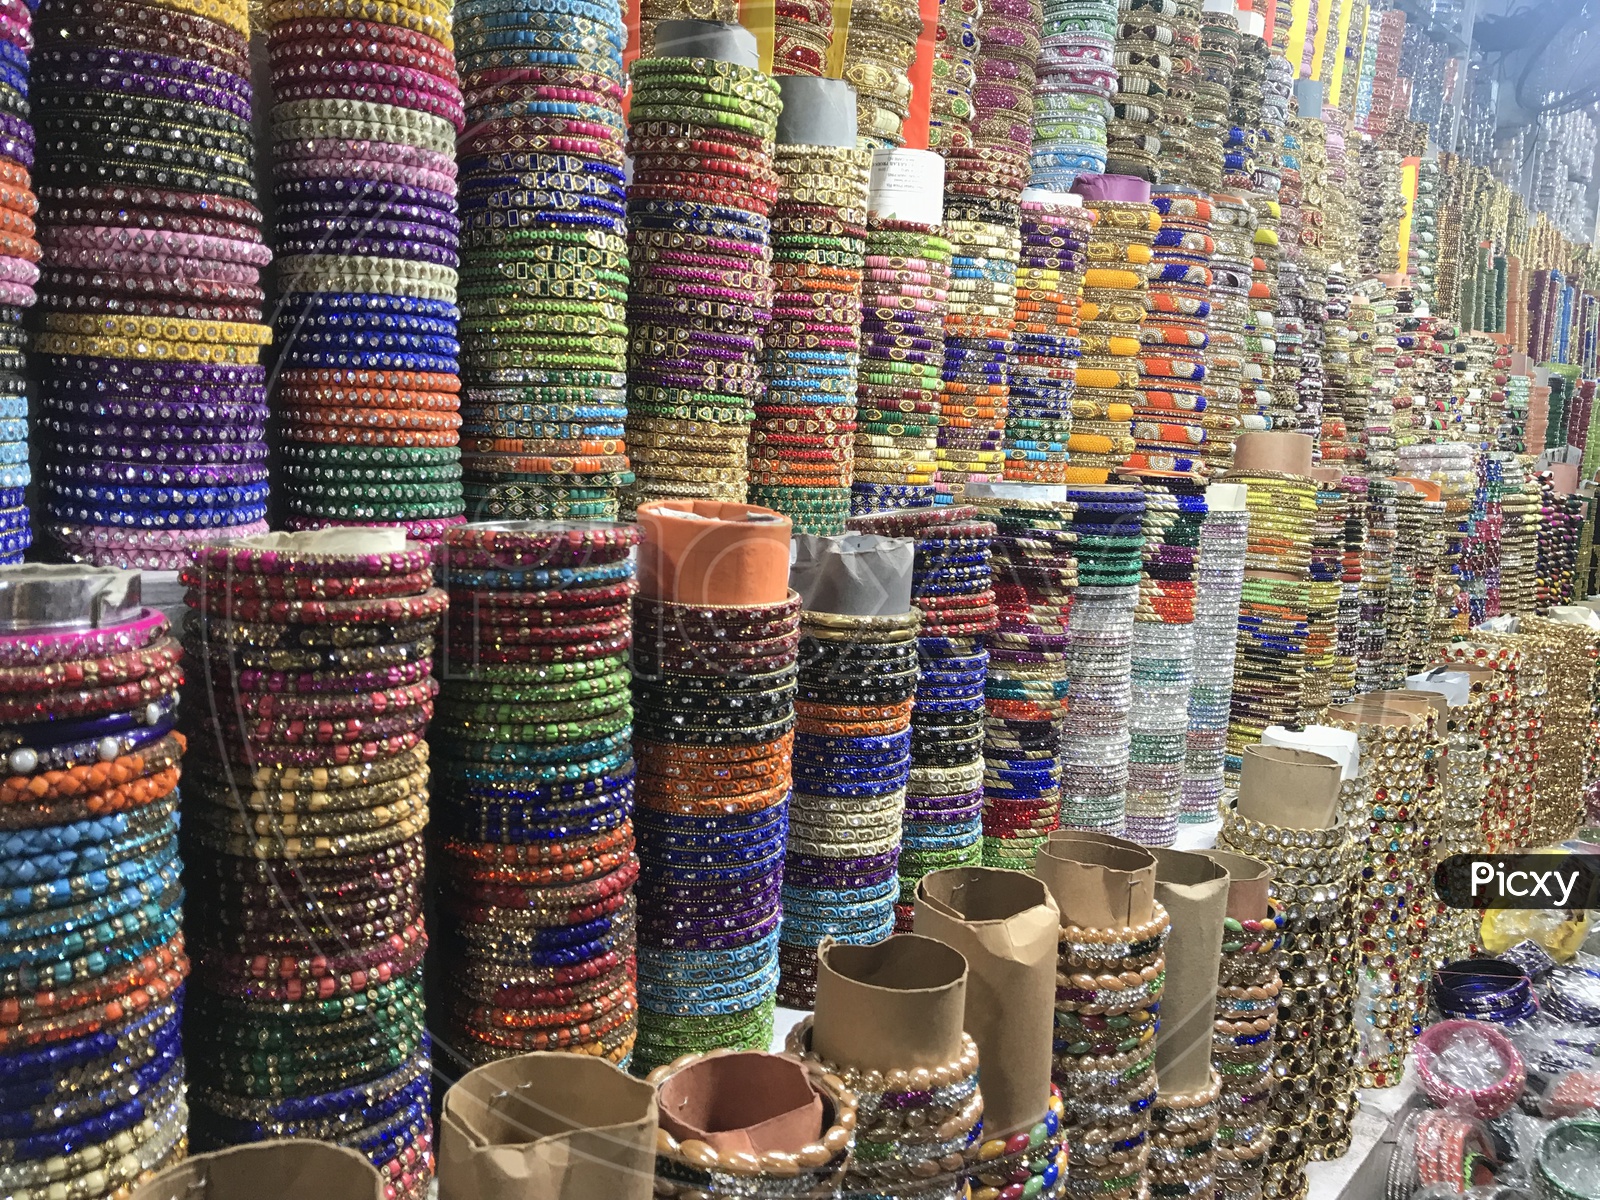 Colorful Bangles stacked up in the Bangle Store in Tiruchanur near Padamavathi temple